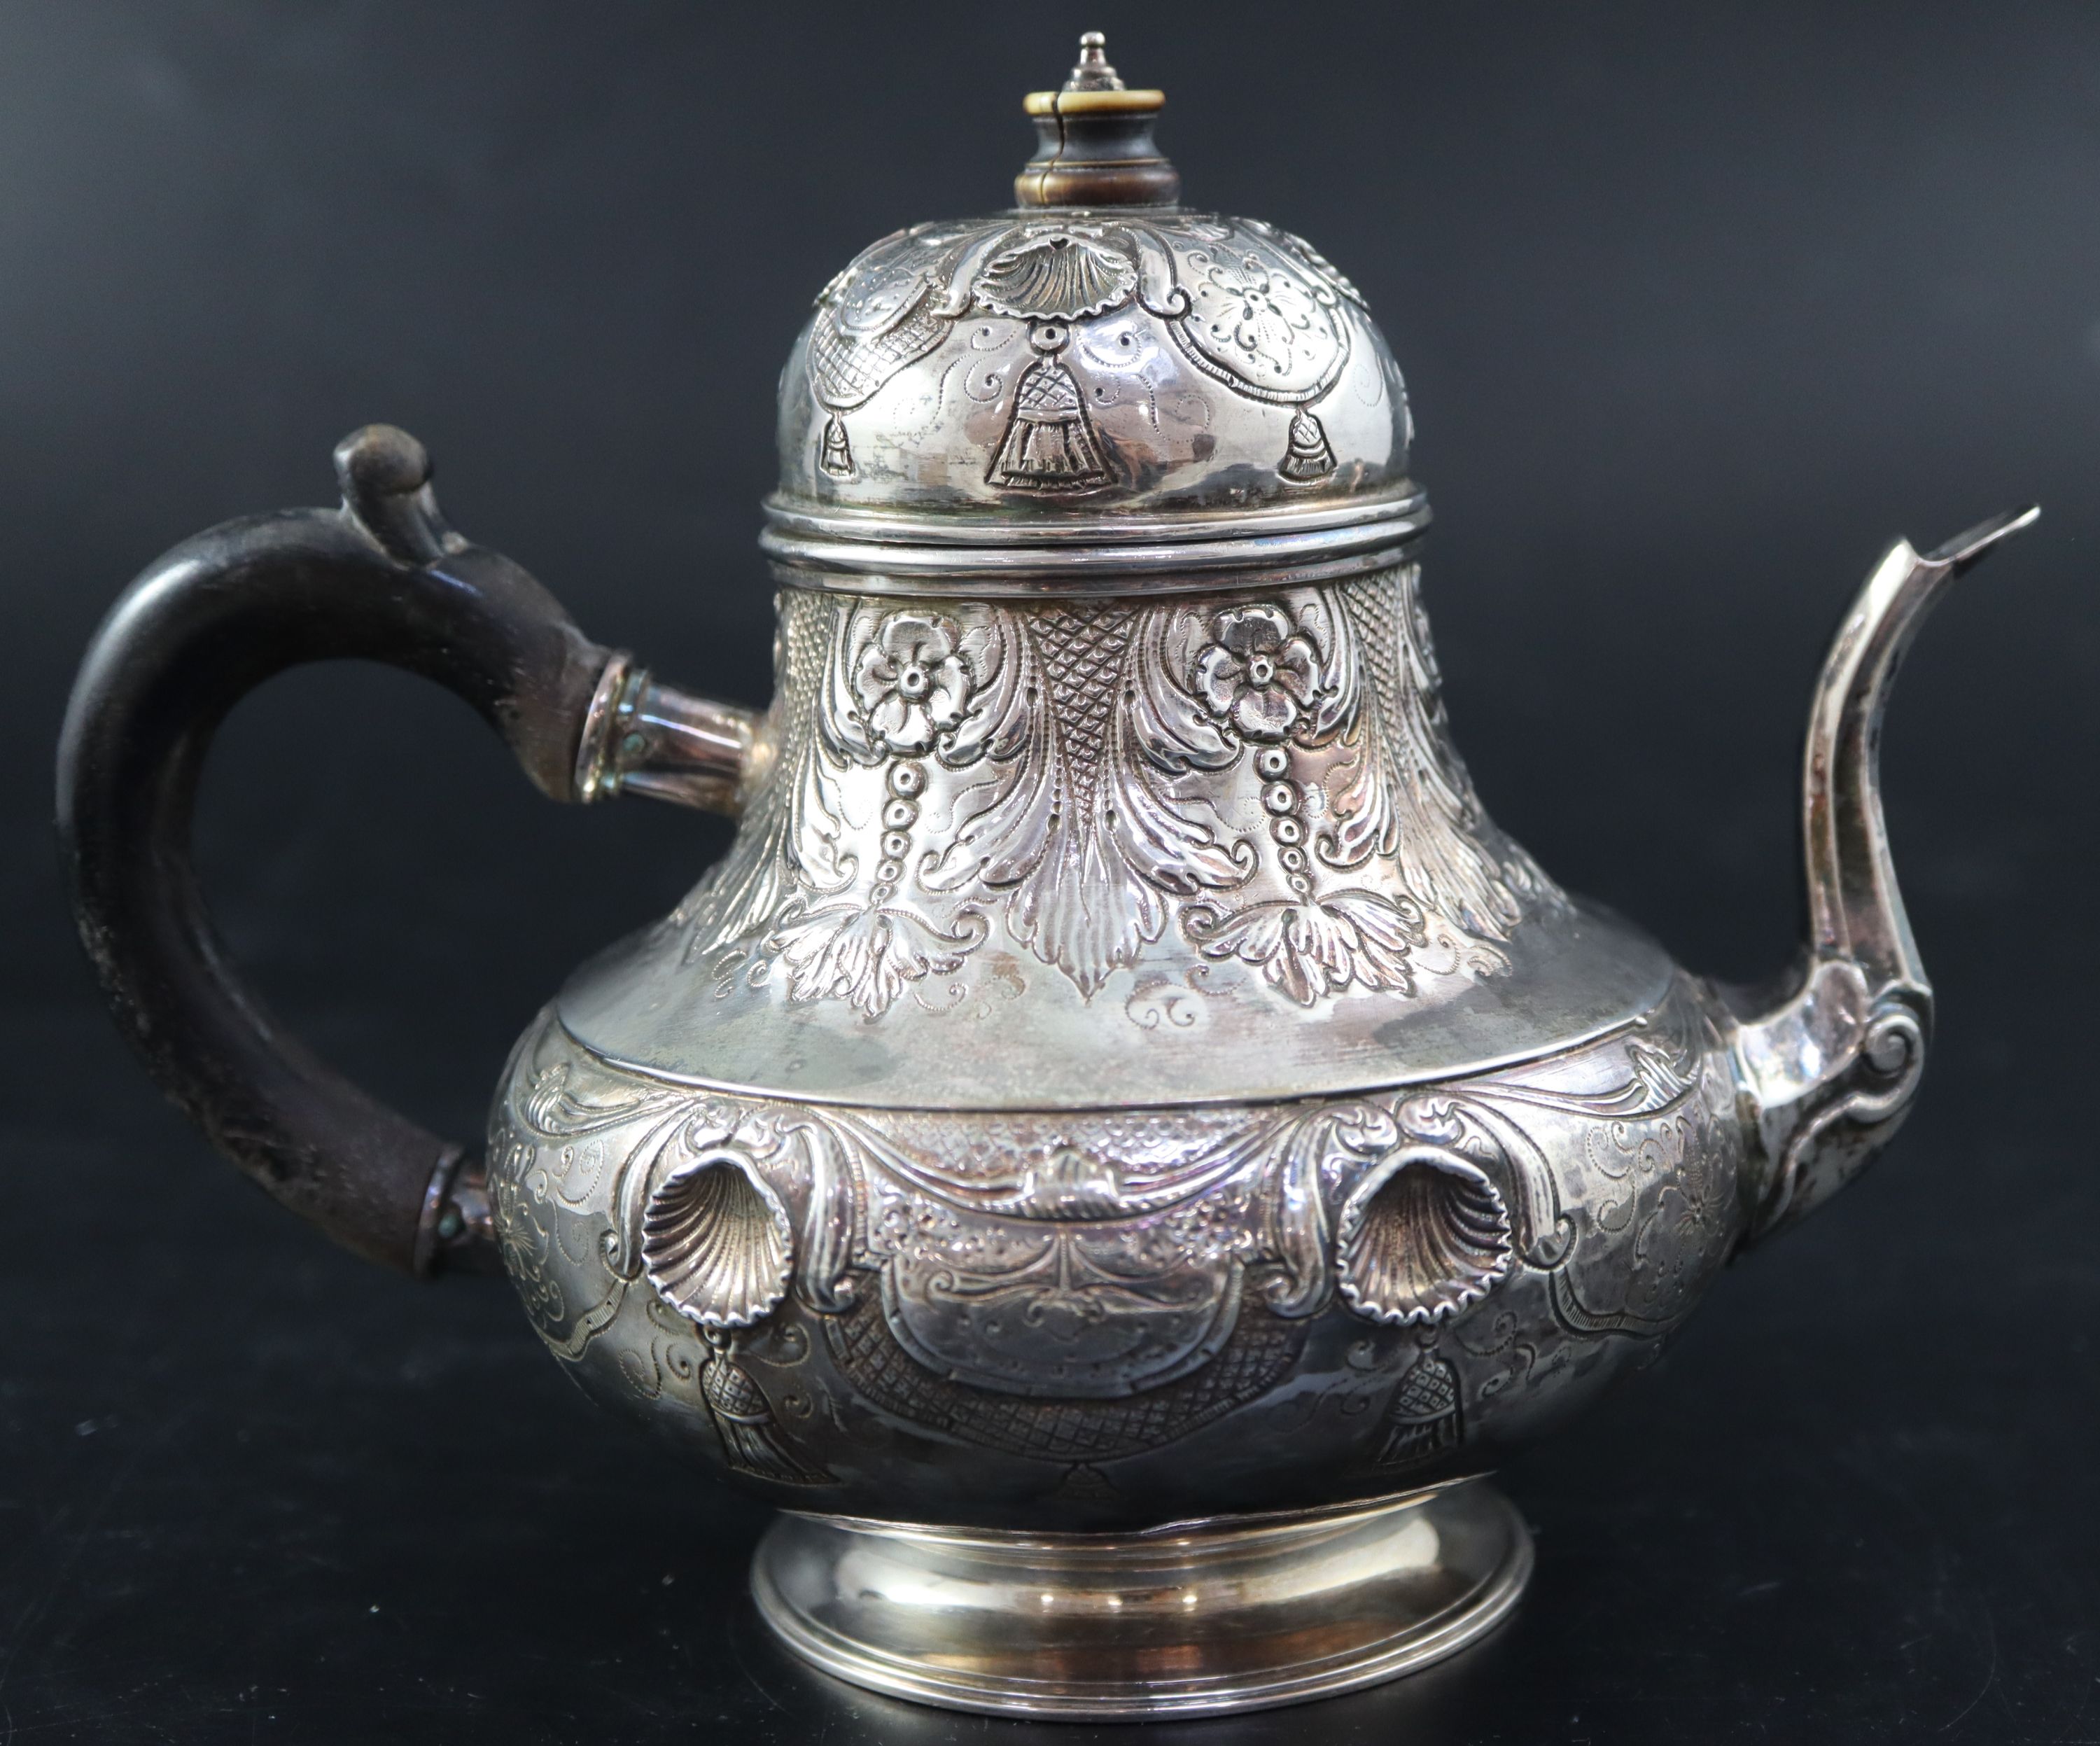 A late 18th/early 19th century Dutch embossed white metal pear shaped teapot, height 15.3cm, gross 10oz.